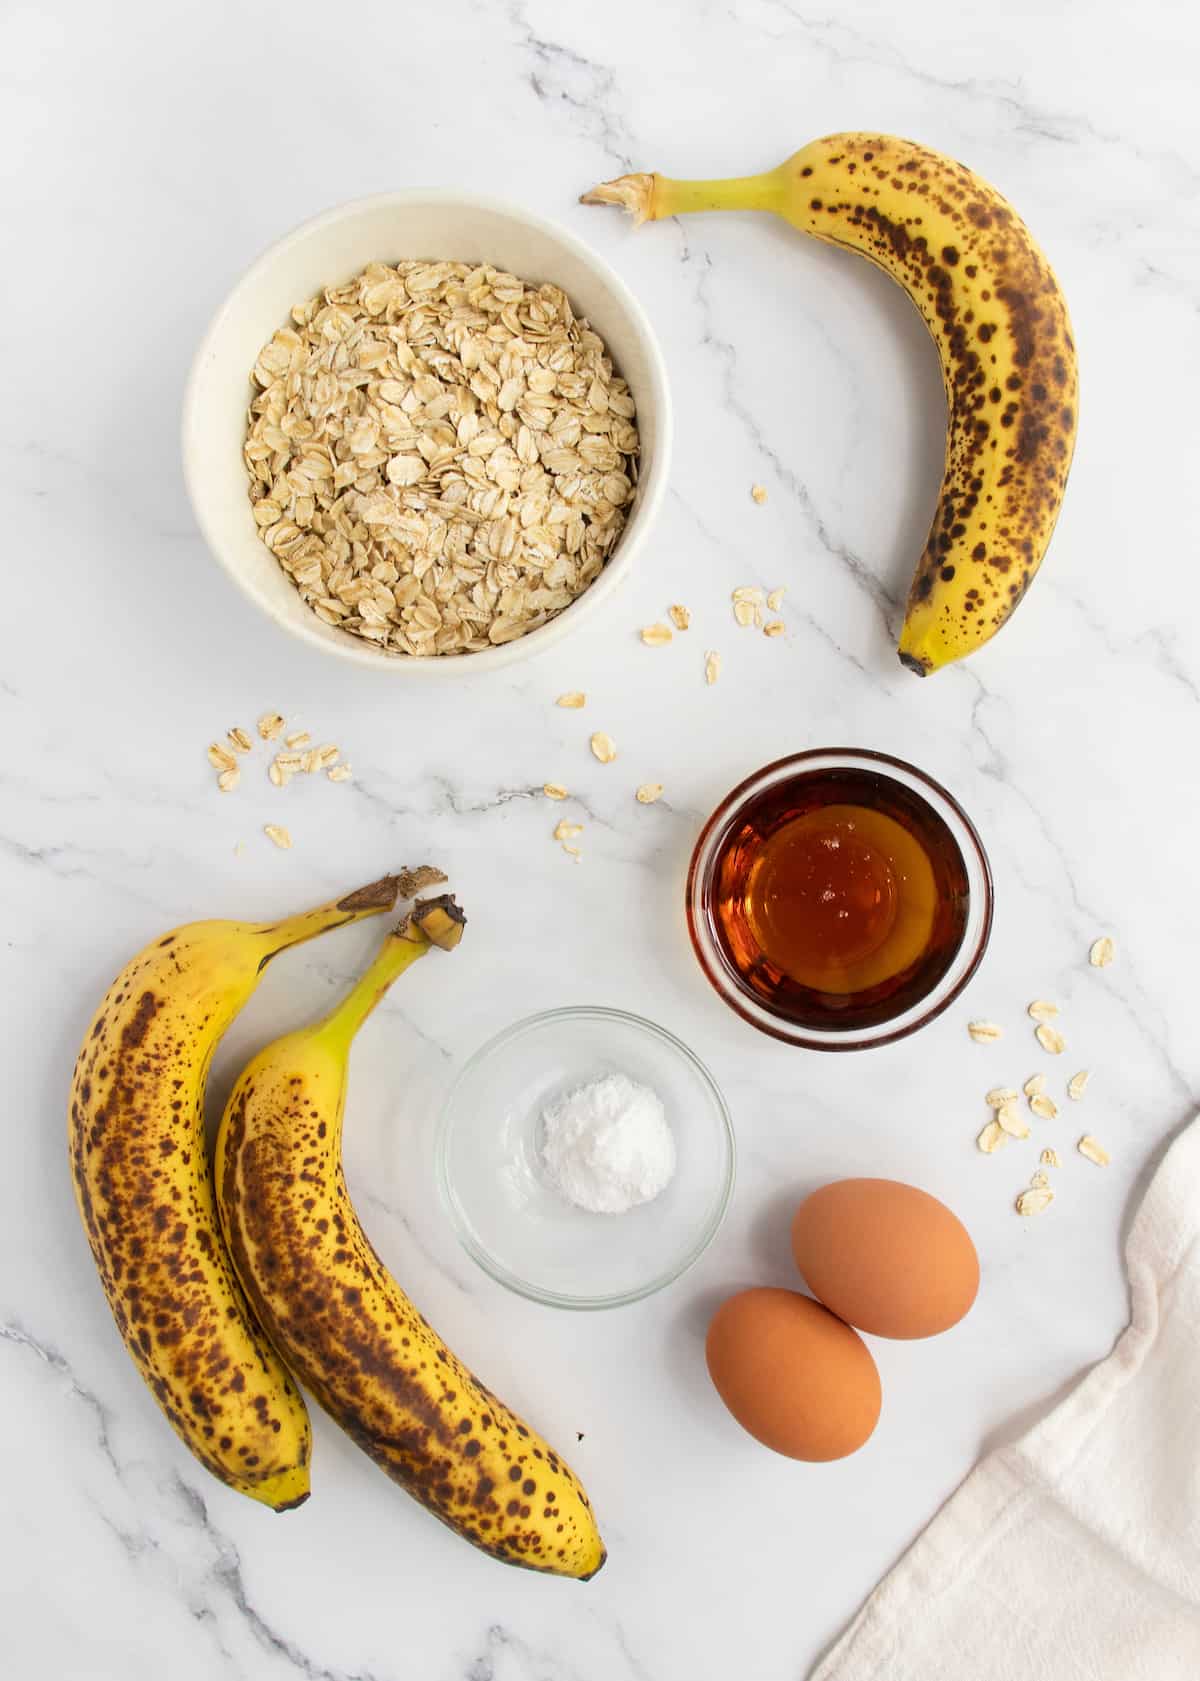 5-Ingredient Flourless Banana Bread by The BakerMama